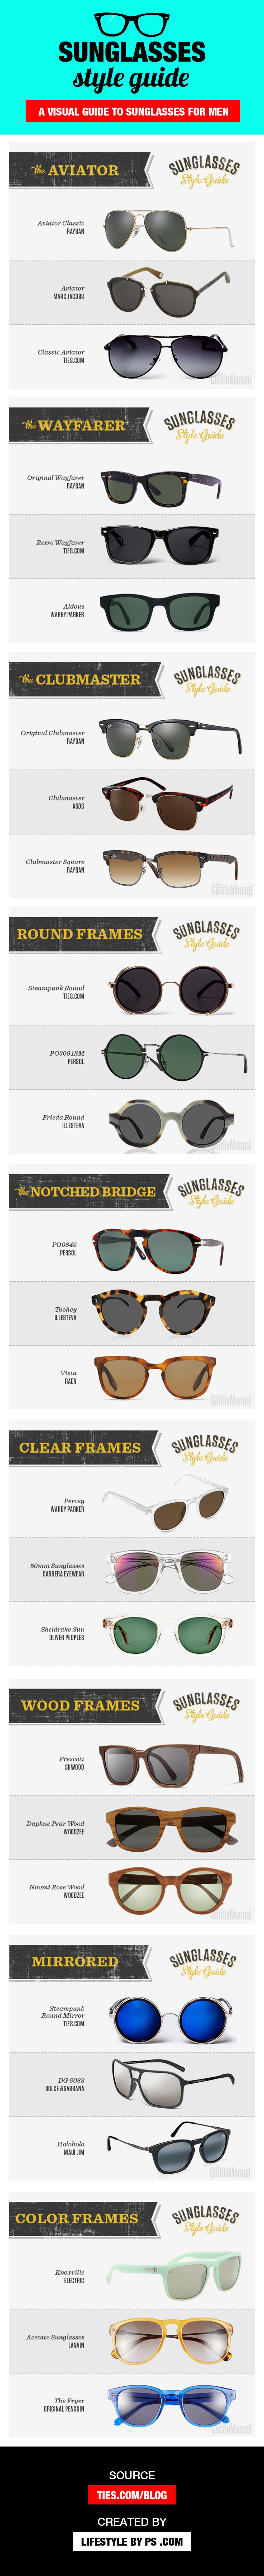 A Visual Guide To Sunglasses For Men - Infographic